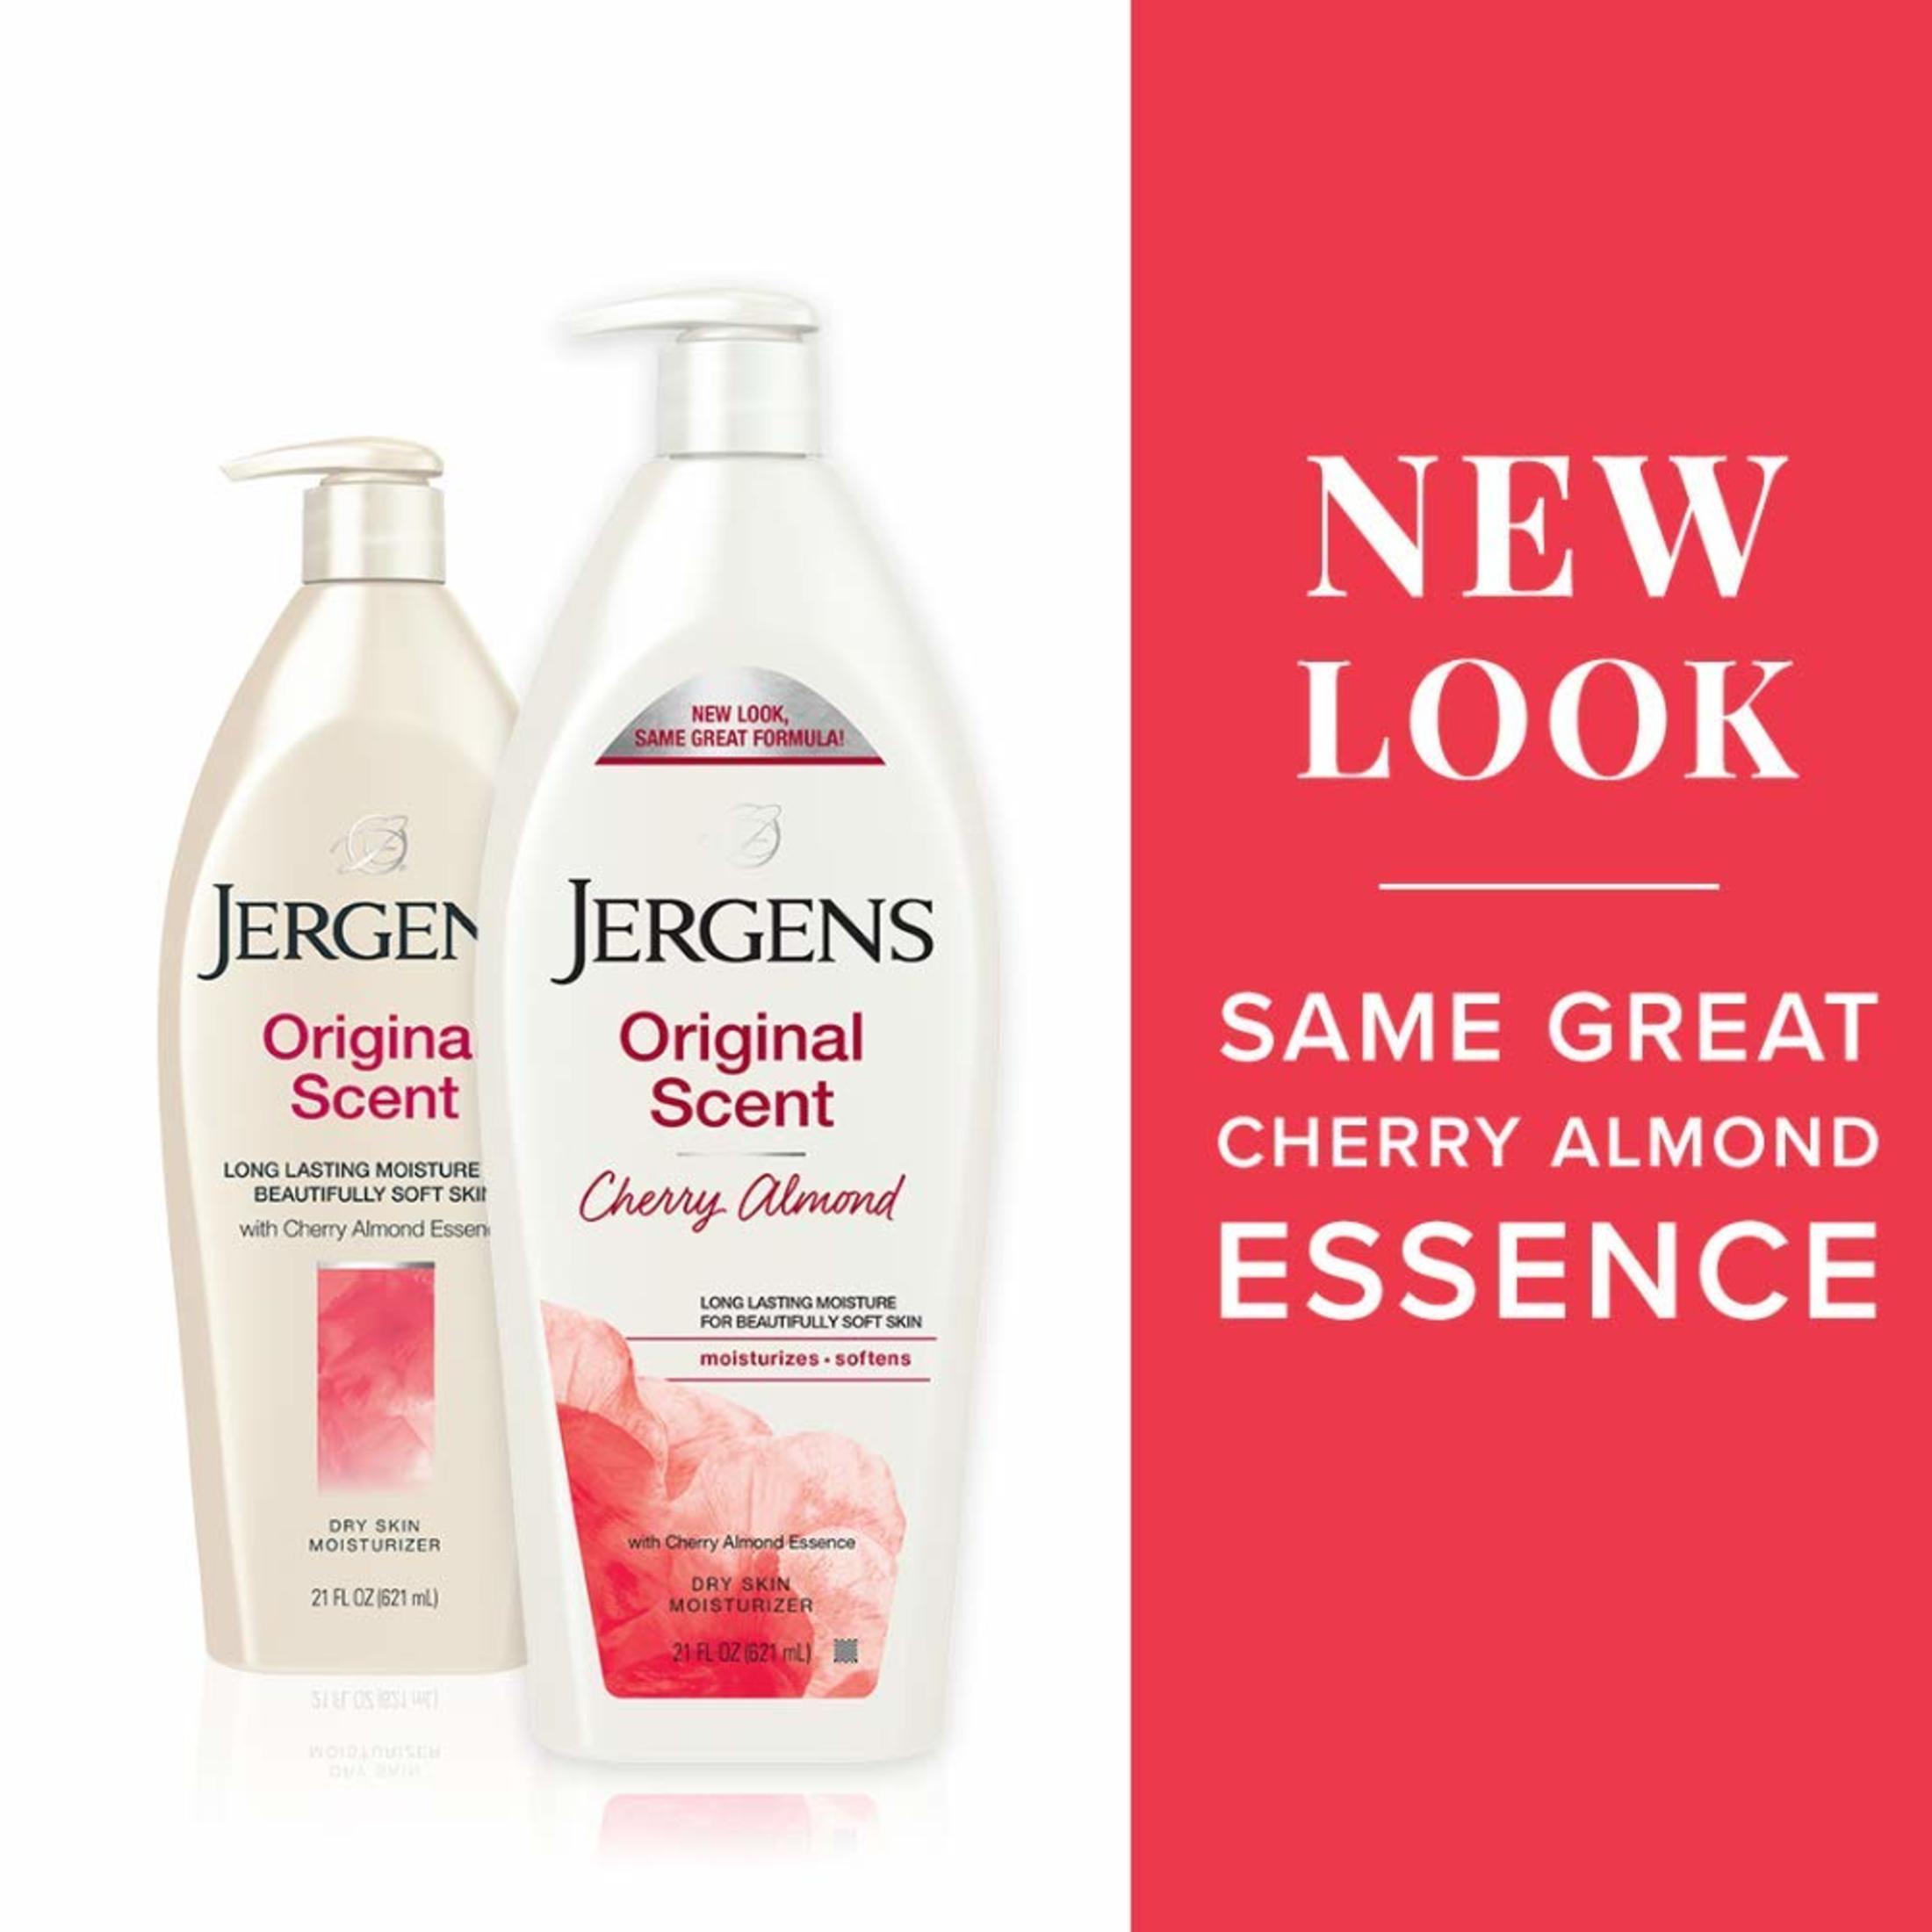 Jergens Original Scent With Cherry Almond Essence Dry Skin Lotion, 21 Oz - image 3 of 12